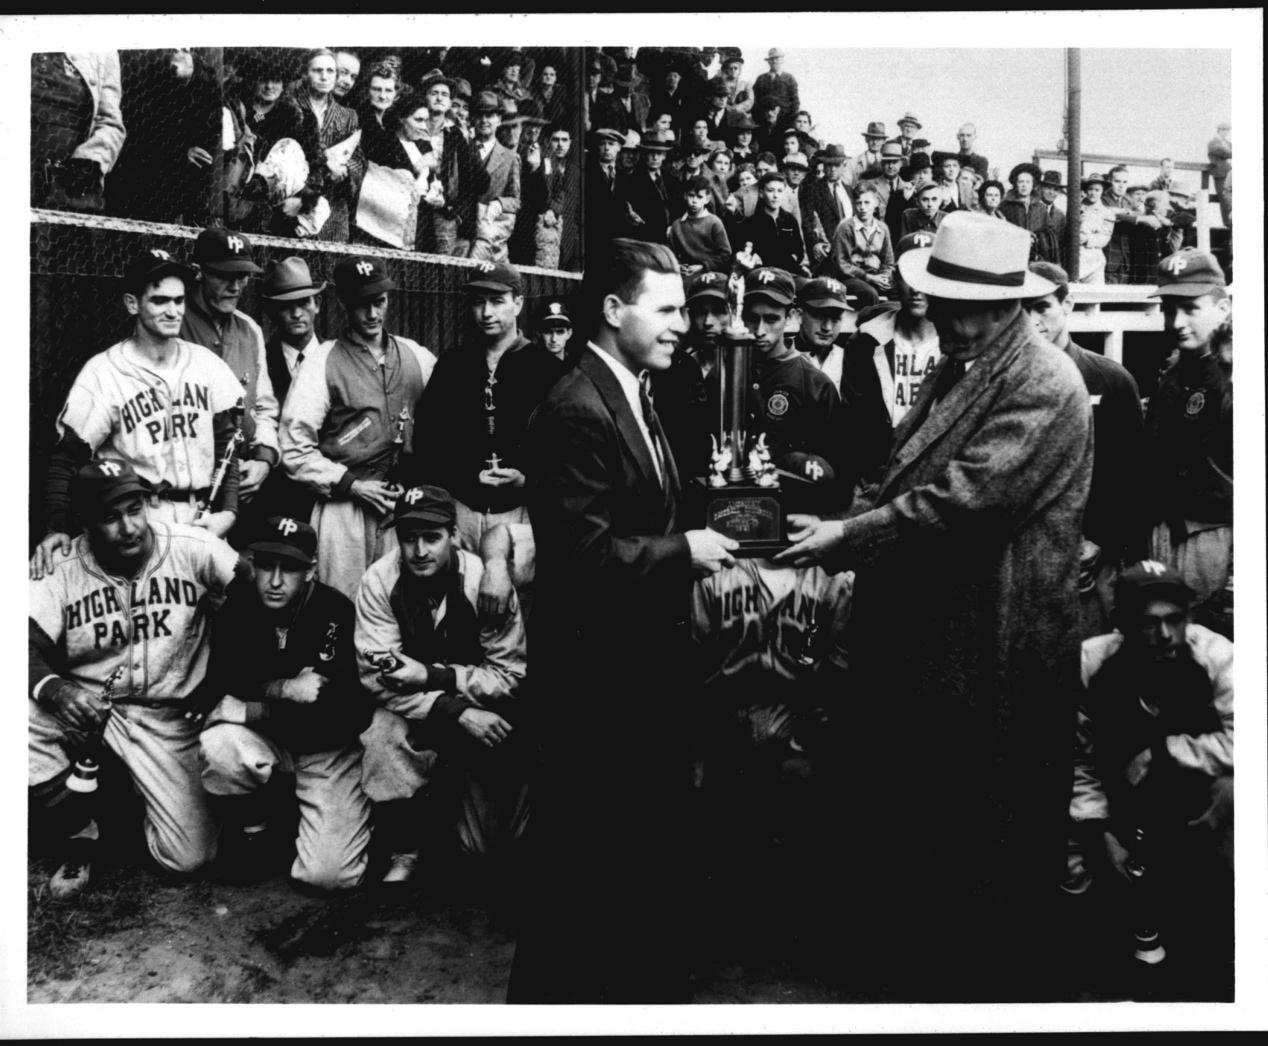 Luther Brackett began working at the Highland Mill Park #3 in 1934. He started as a trainee, but eventually became the General Manager of the mill until it closed in 1969. Brackett accepted, on behalf of the Highland Park baseball team, a trophy for placing second in the 1941 National Amateur World Series in Battle Creek, Michigan.